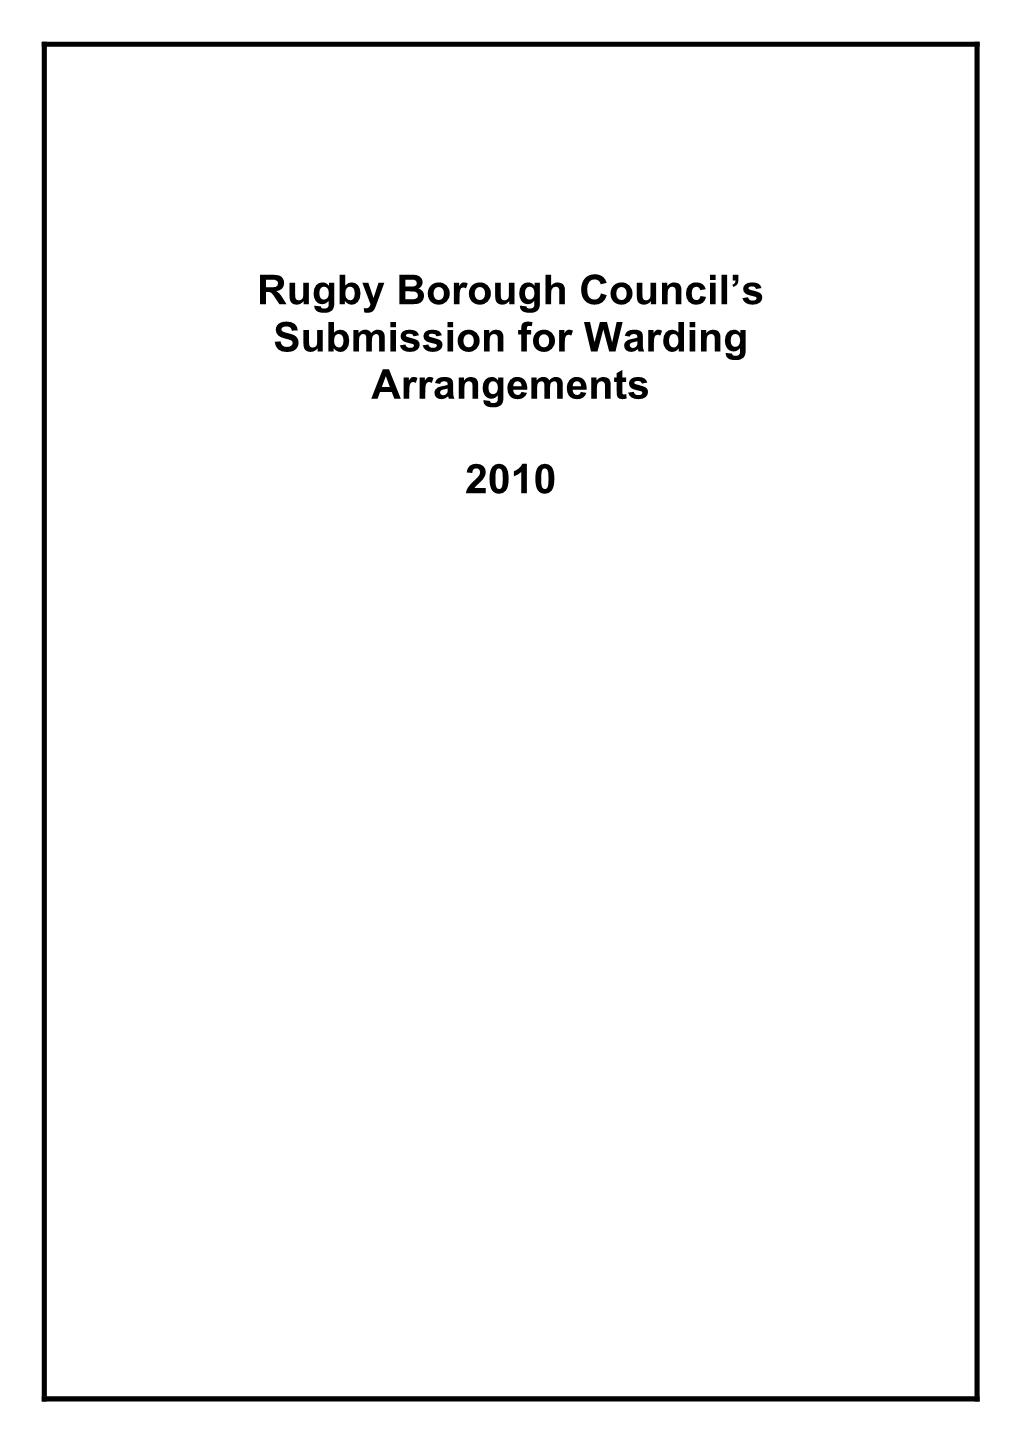 Rugby Borough Council's Submission for Warding